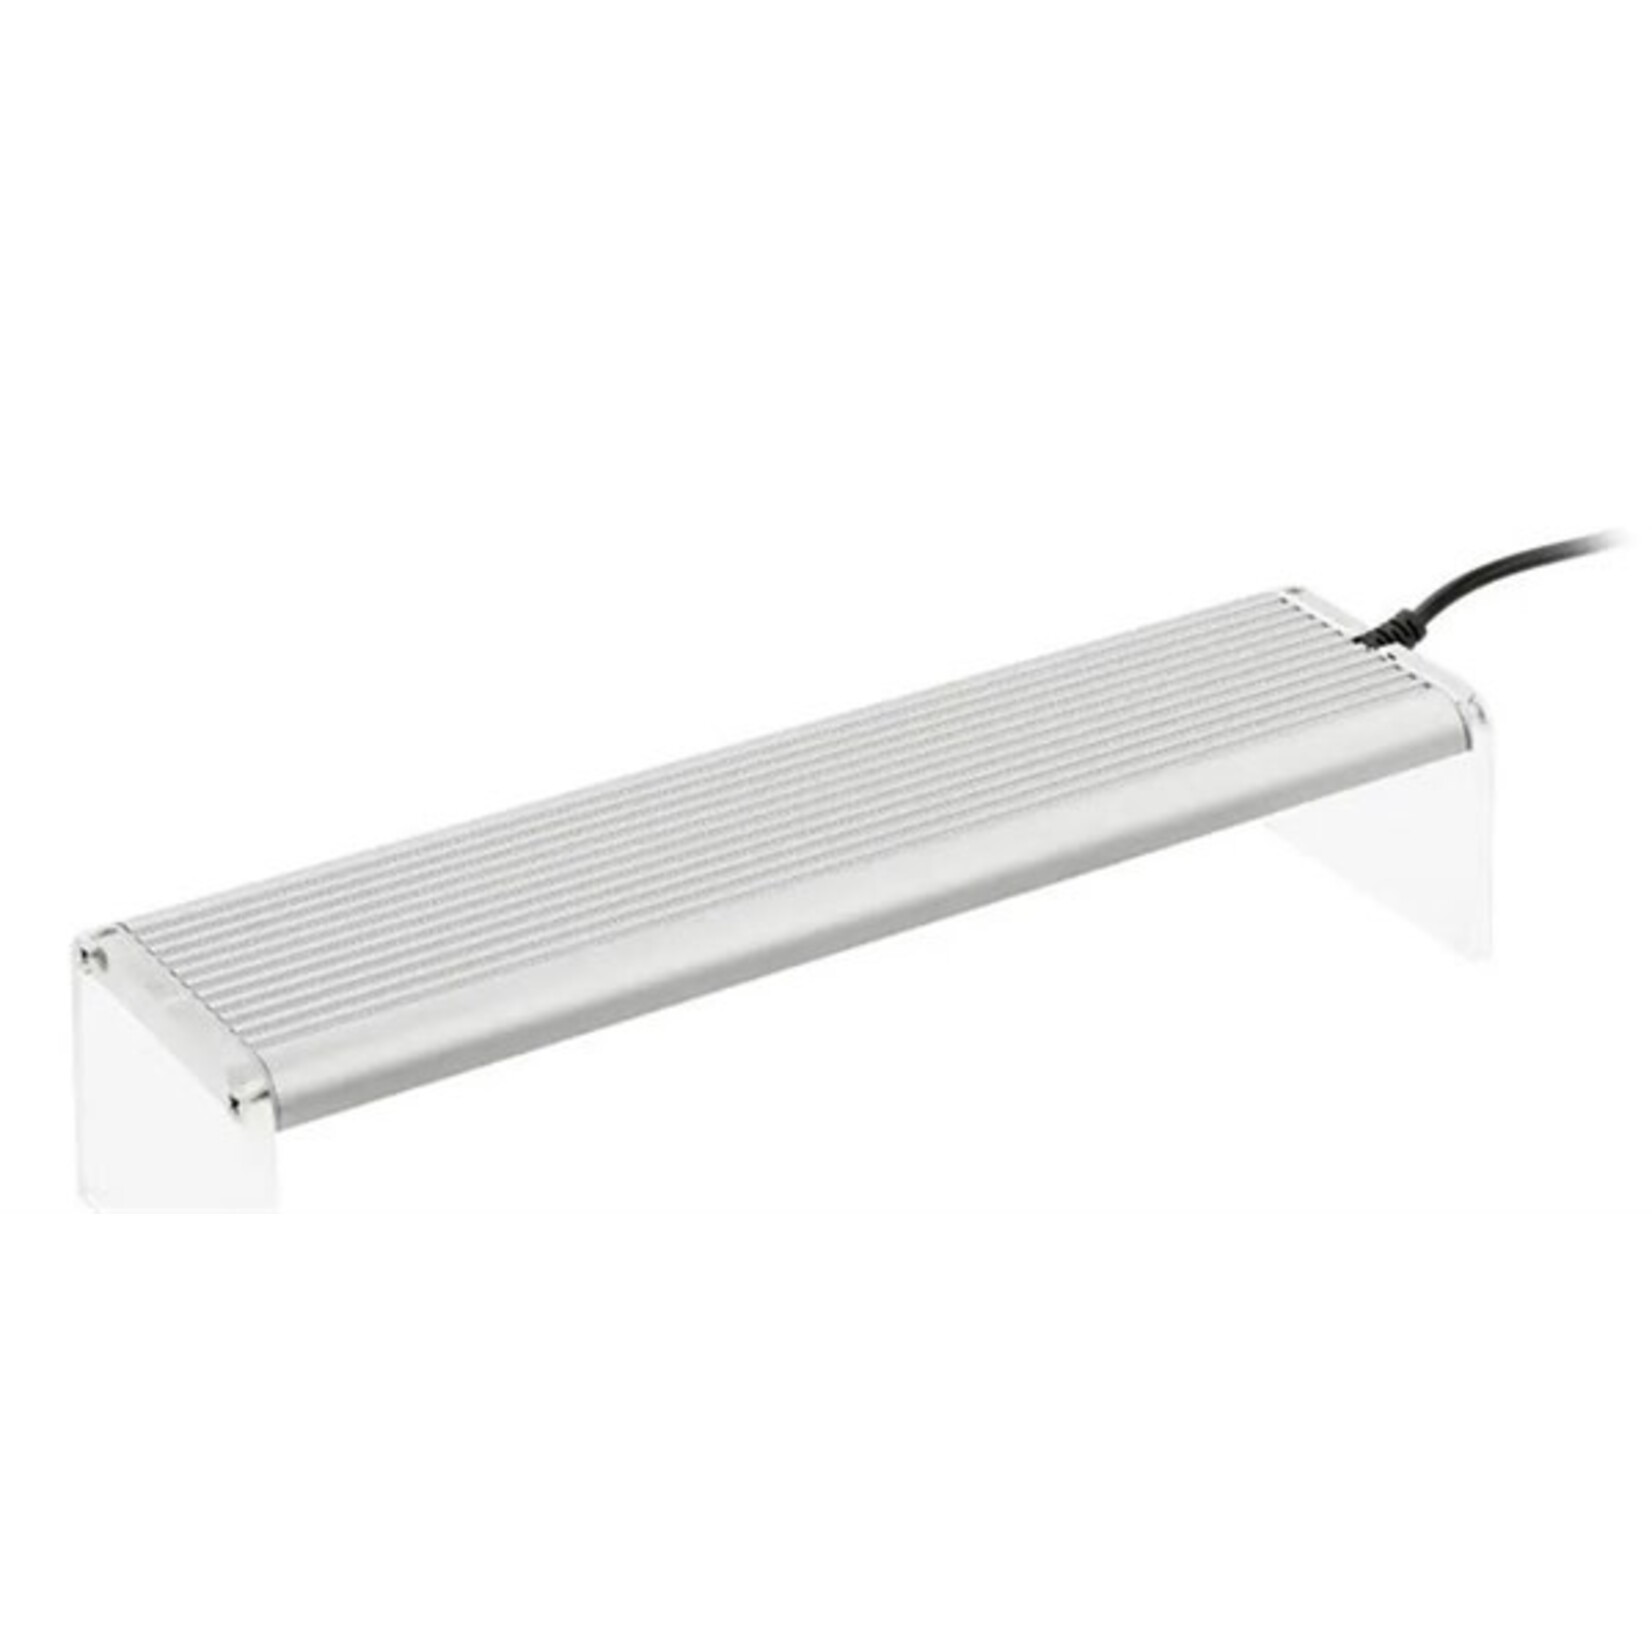 Chihiros A LED A401 40cm 24w - incl. Duitse trafo